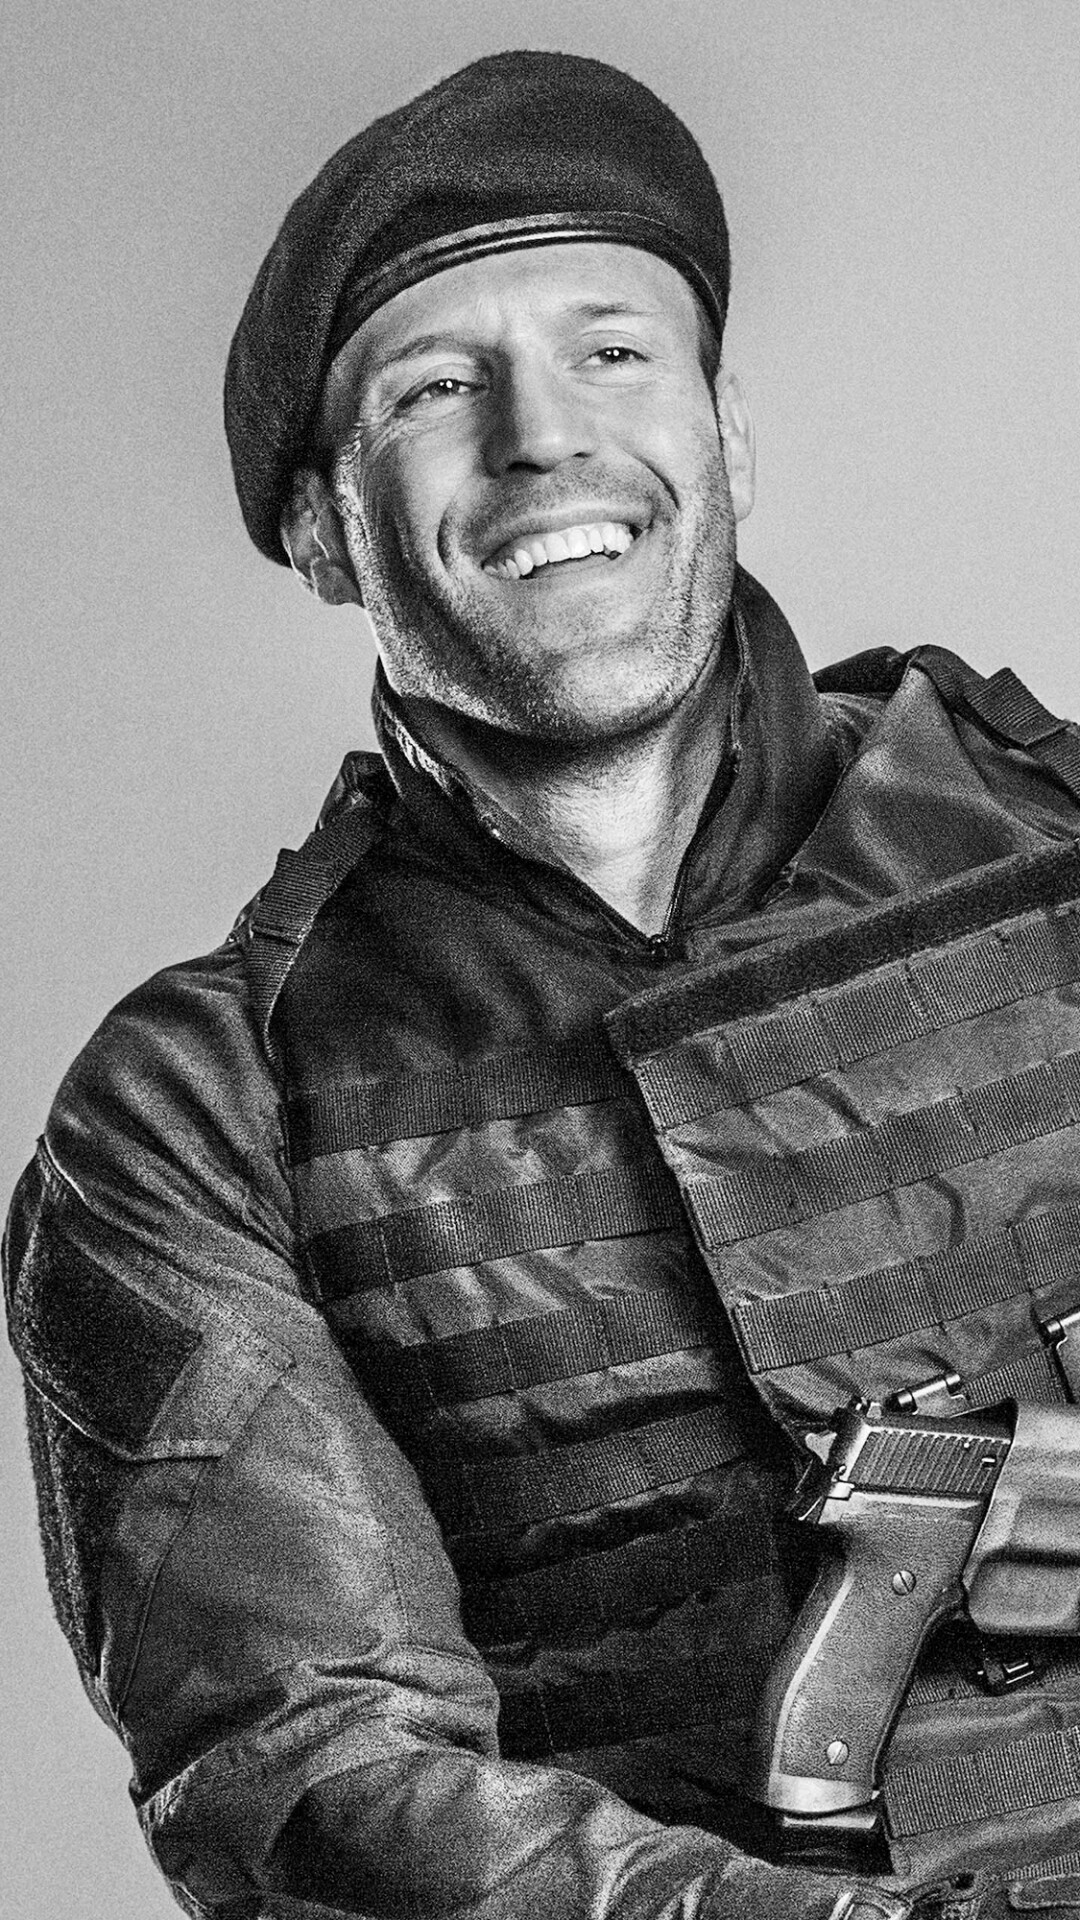 The Expendables 4: Jason Statham as Lee Christmas, The team's knife expert. 1080x1920 Full HD Wallpaper.